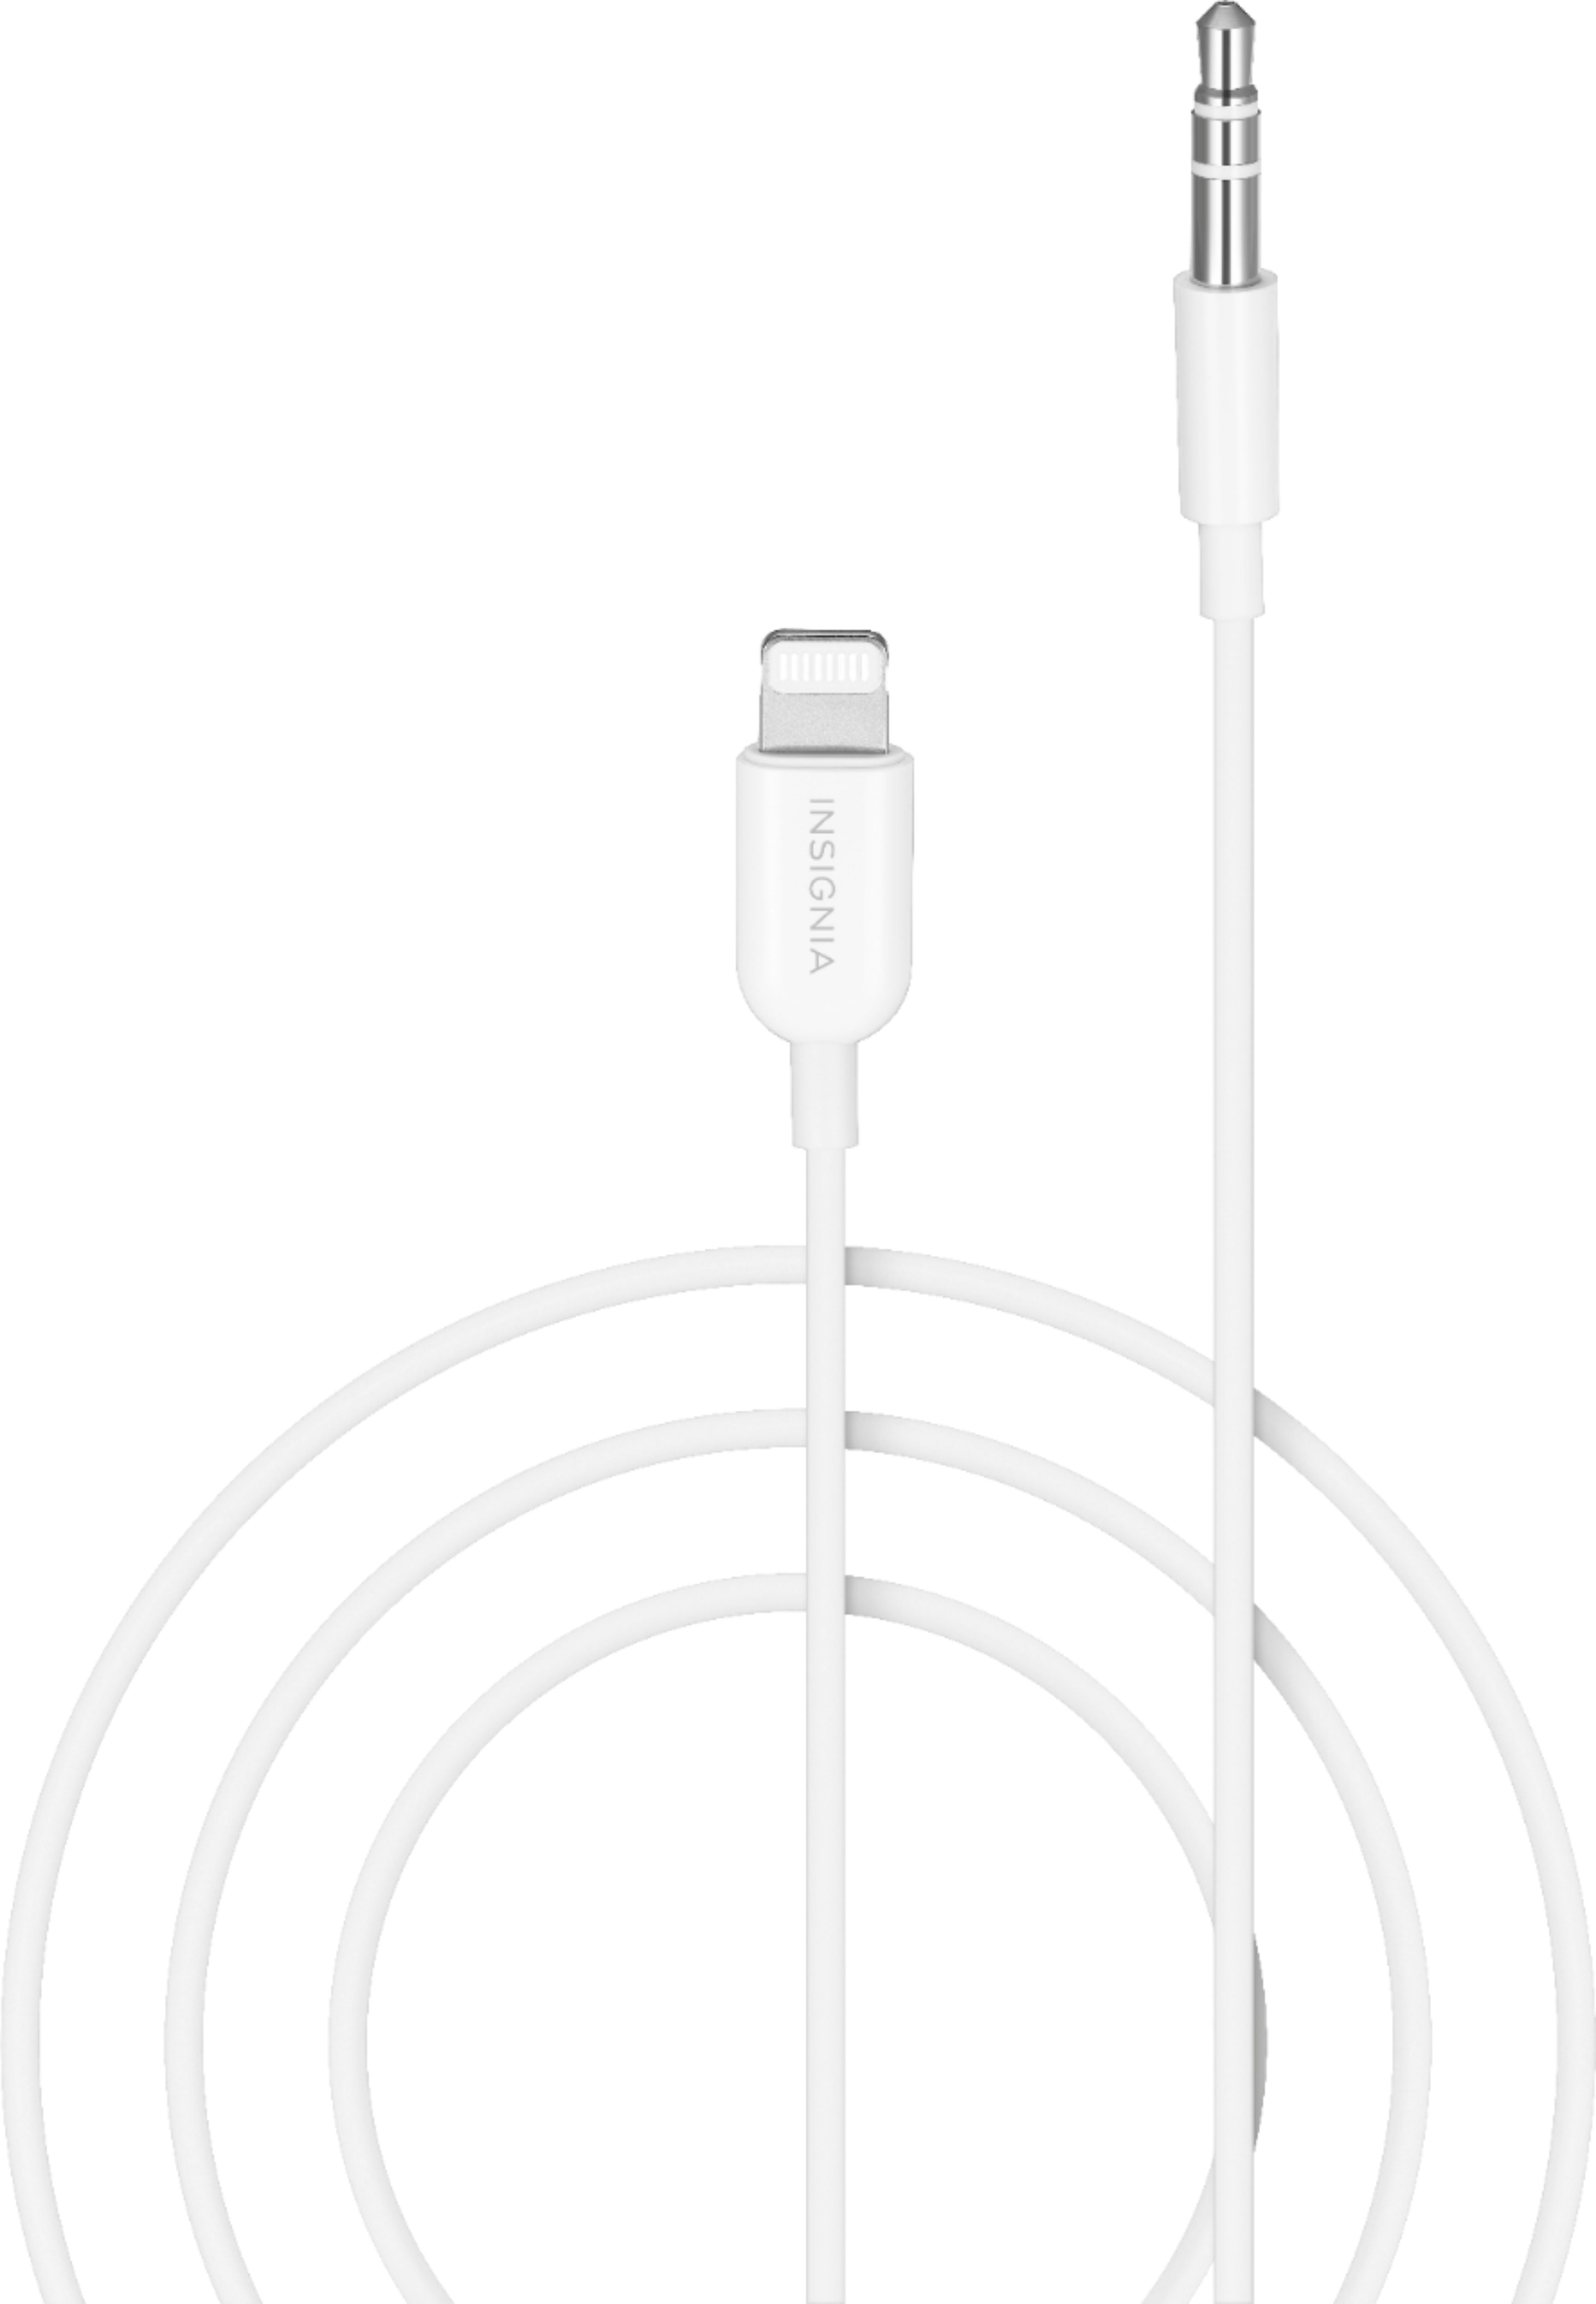 Best Buy: Insignia™ Lightning-to-3.5mm Headphone Adapter (2-Pack) White  NS-MA35A5TW